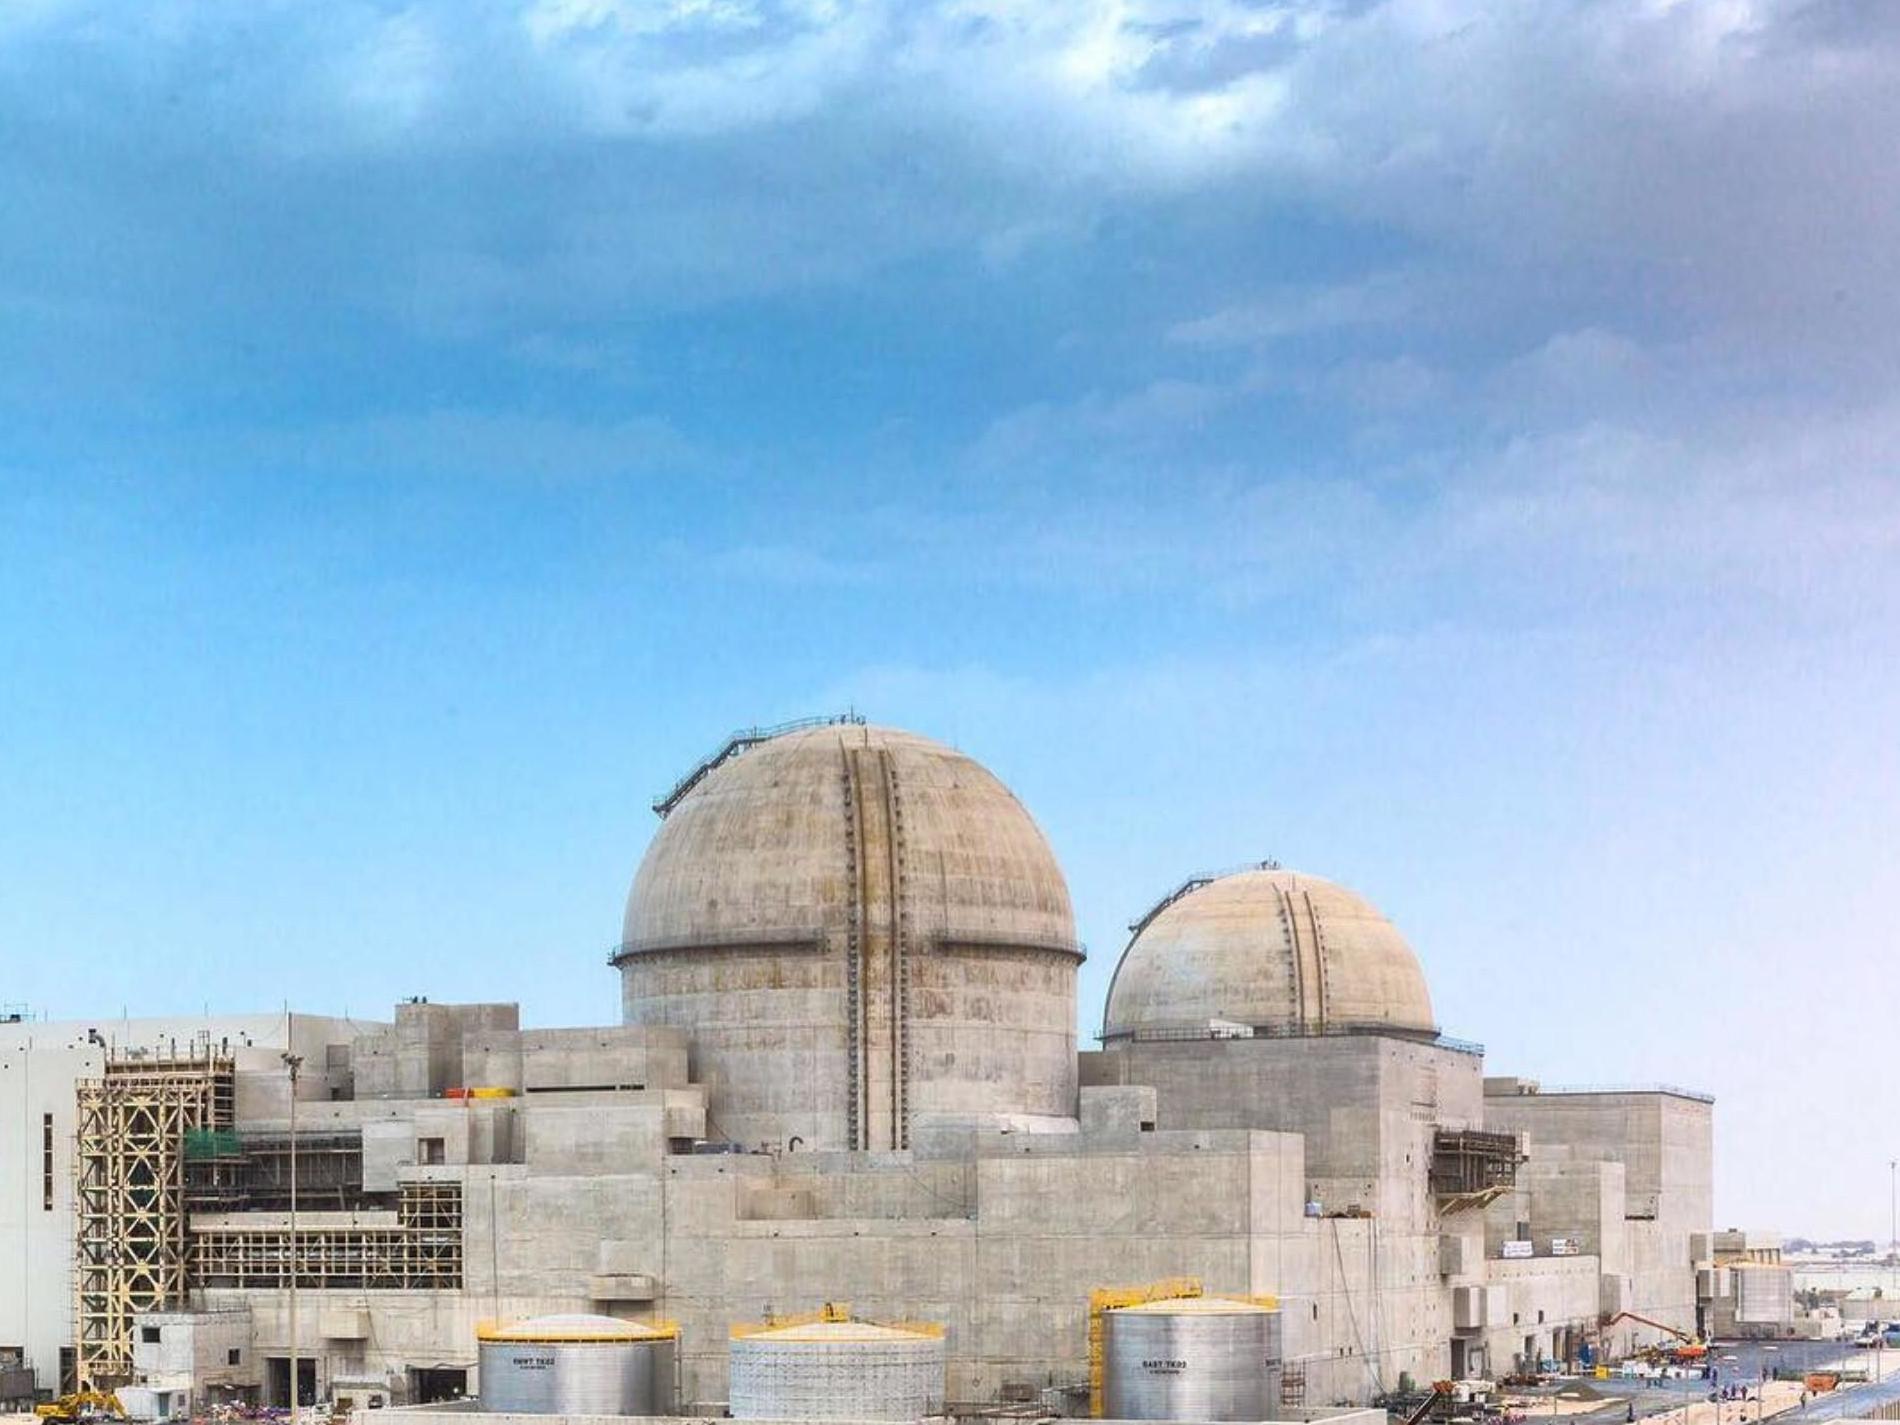 The Barakah Nuclear Power Plant in Abu Dhabi, a major oil producer, is being built by Korea Electric Power Corporation